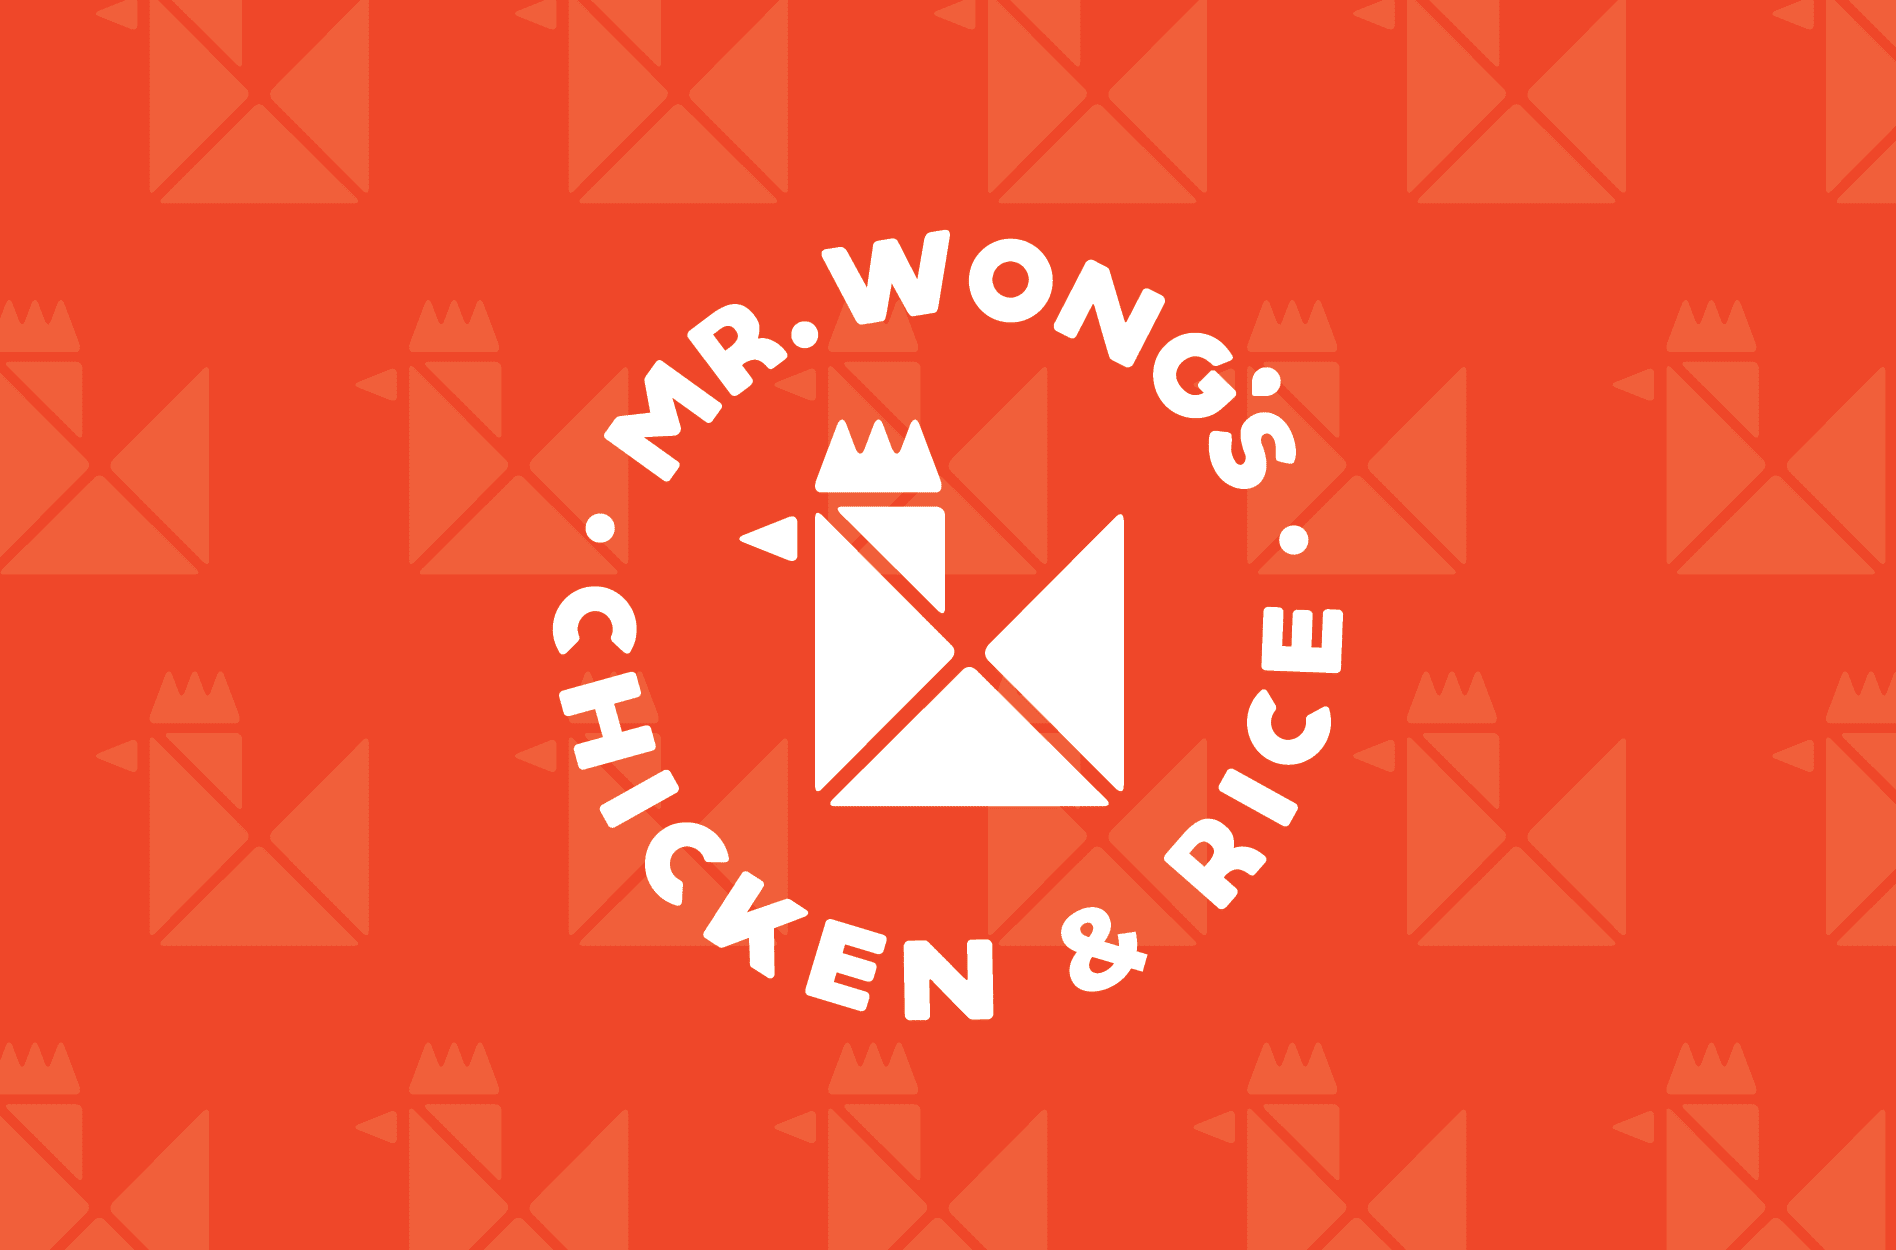 Mr. Wong’s Chicken and Rice